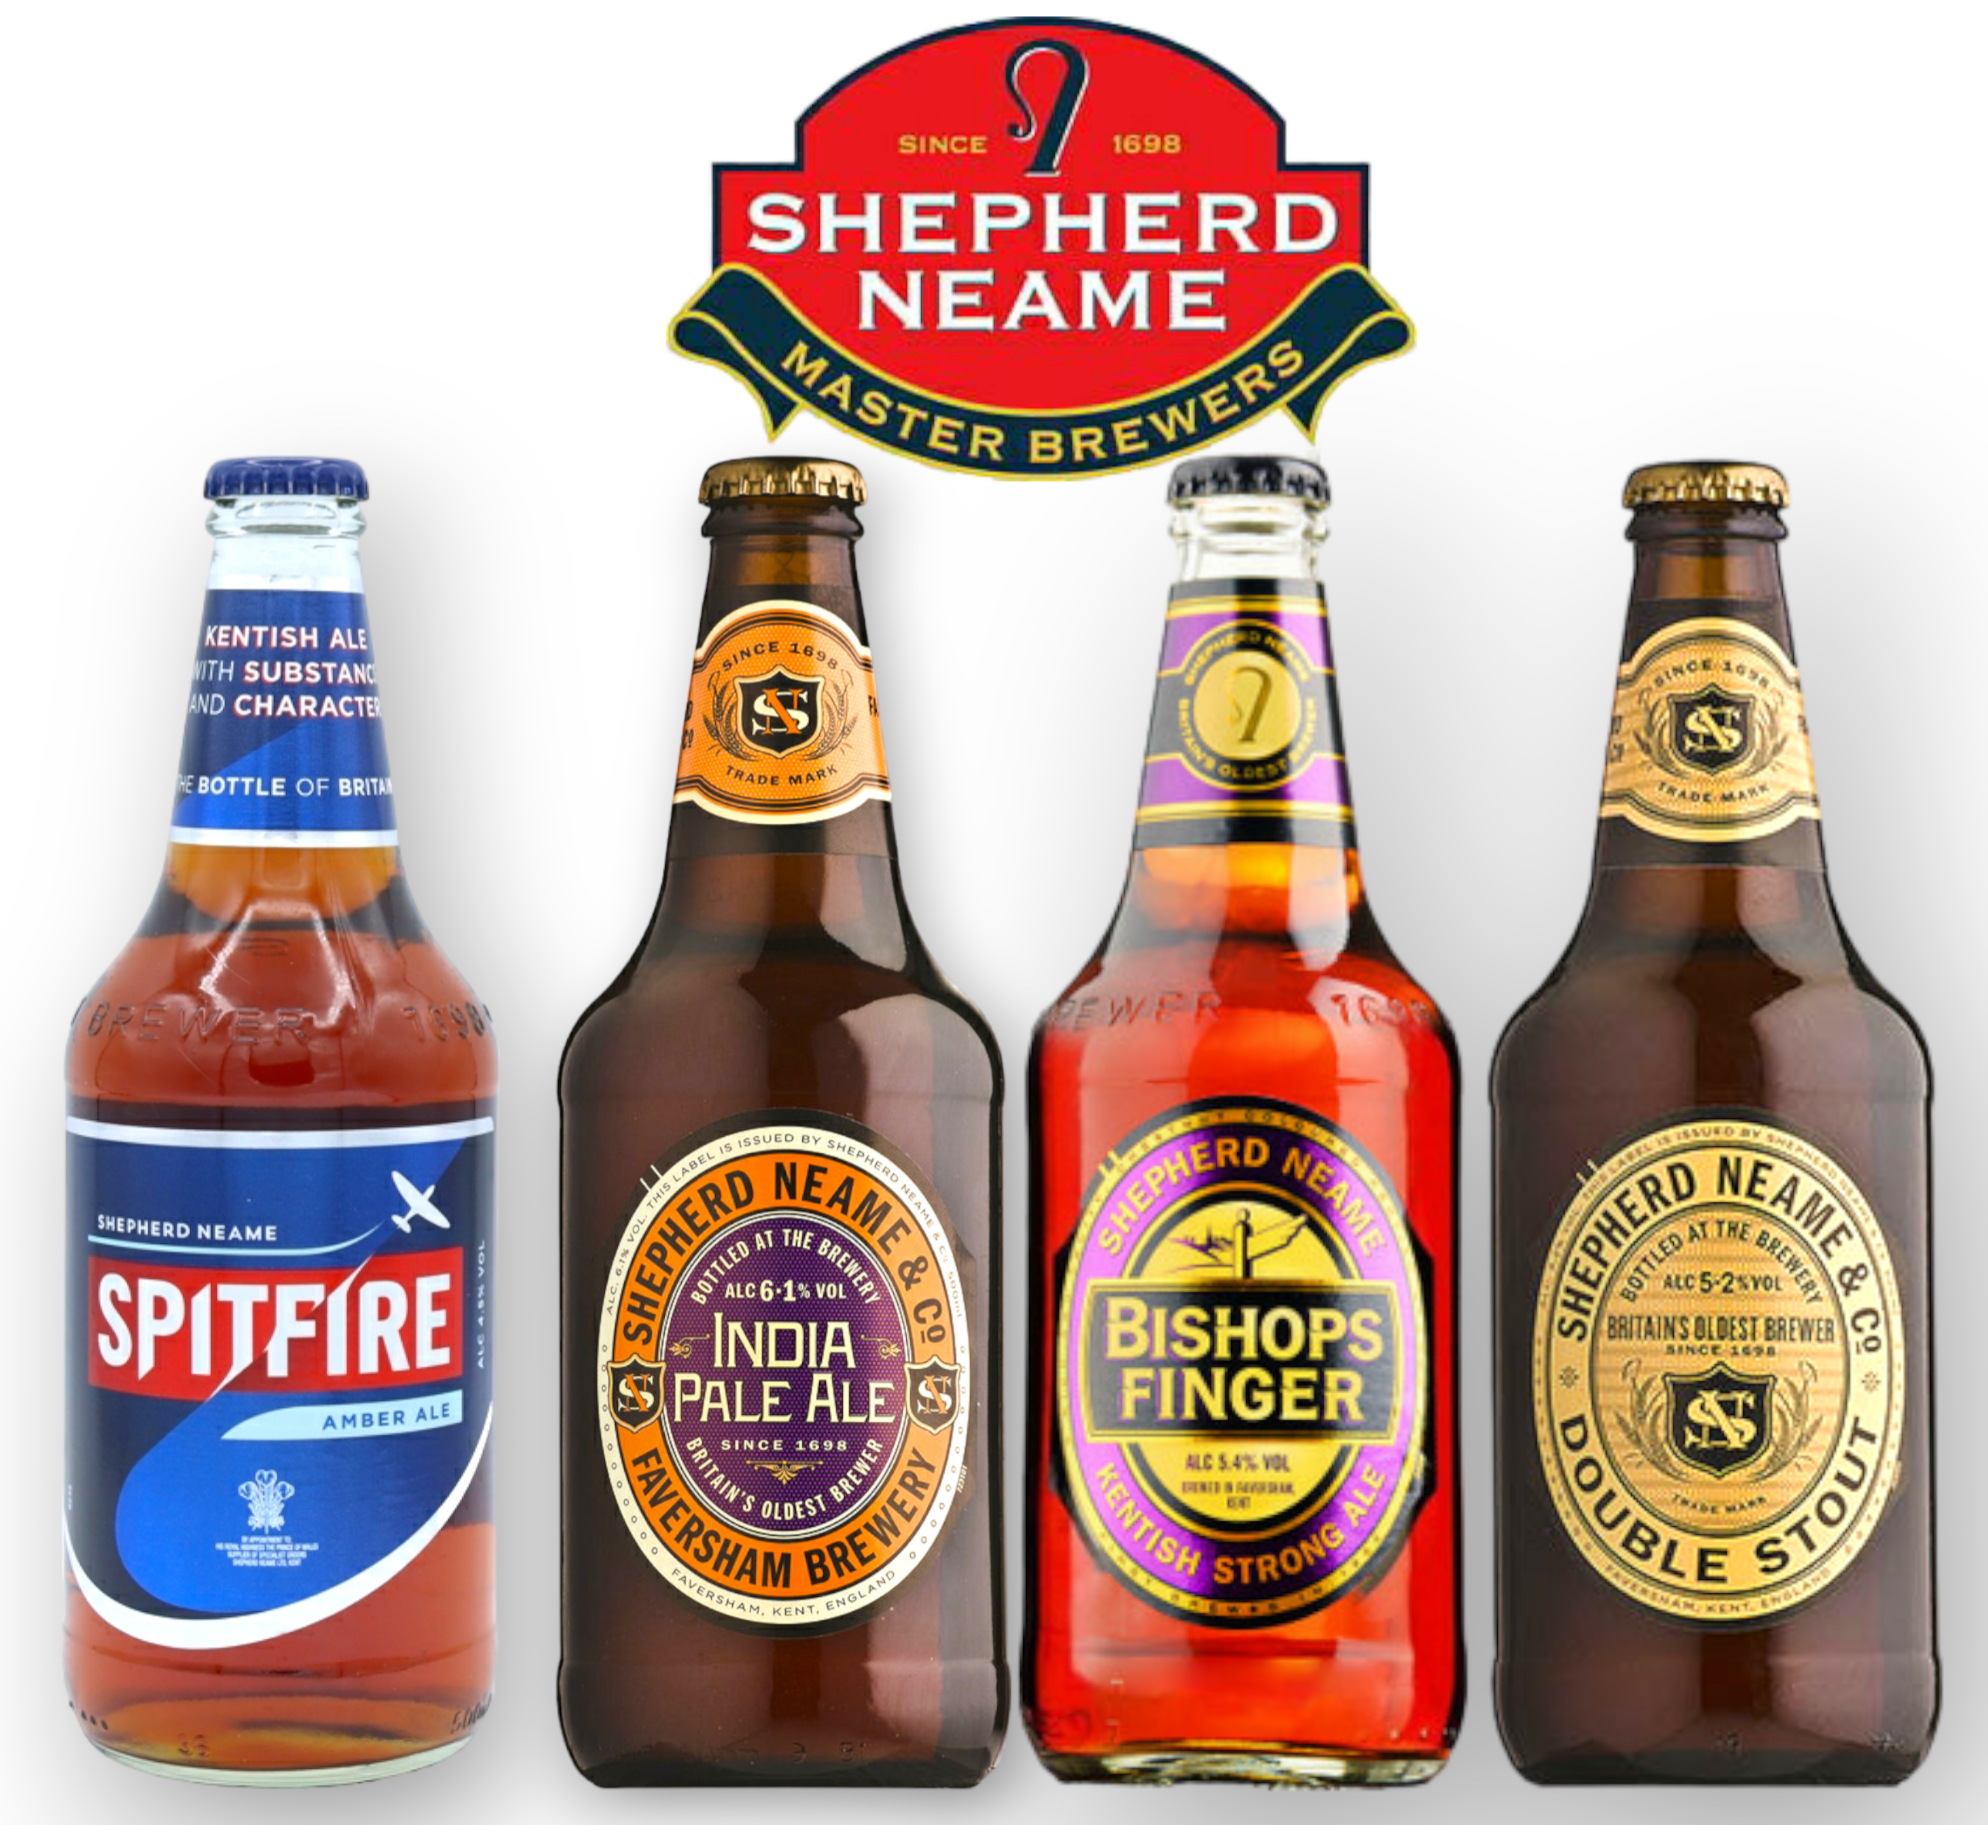 Sheperd Neame Brewery Mix- Spitfire Amber Ale - IPA - Bishops Finger- Double Stout 0,5l